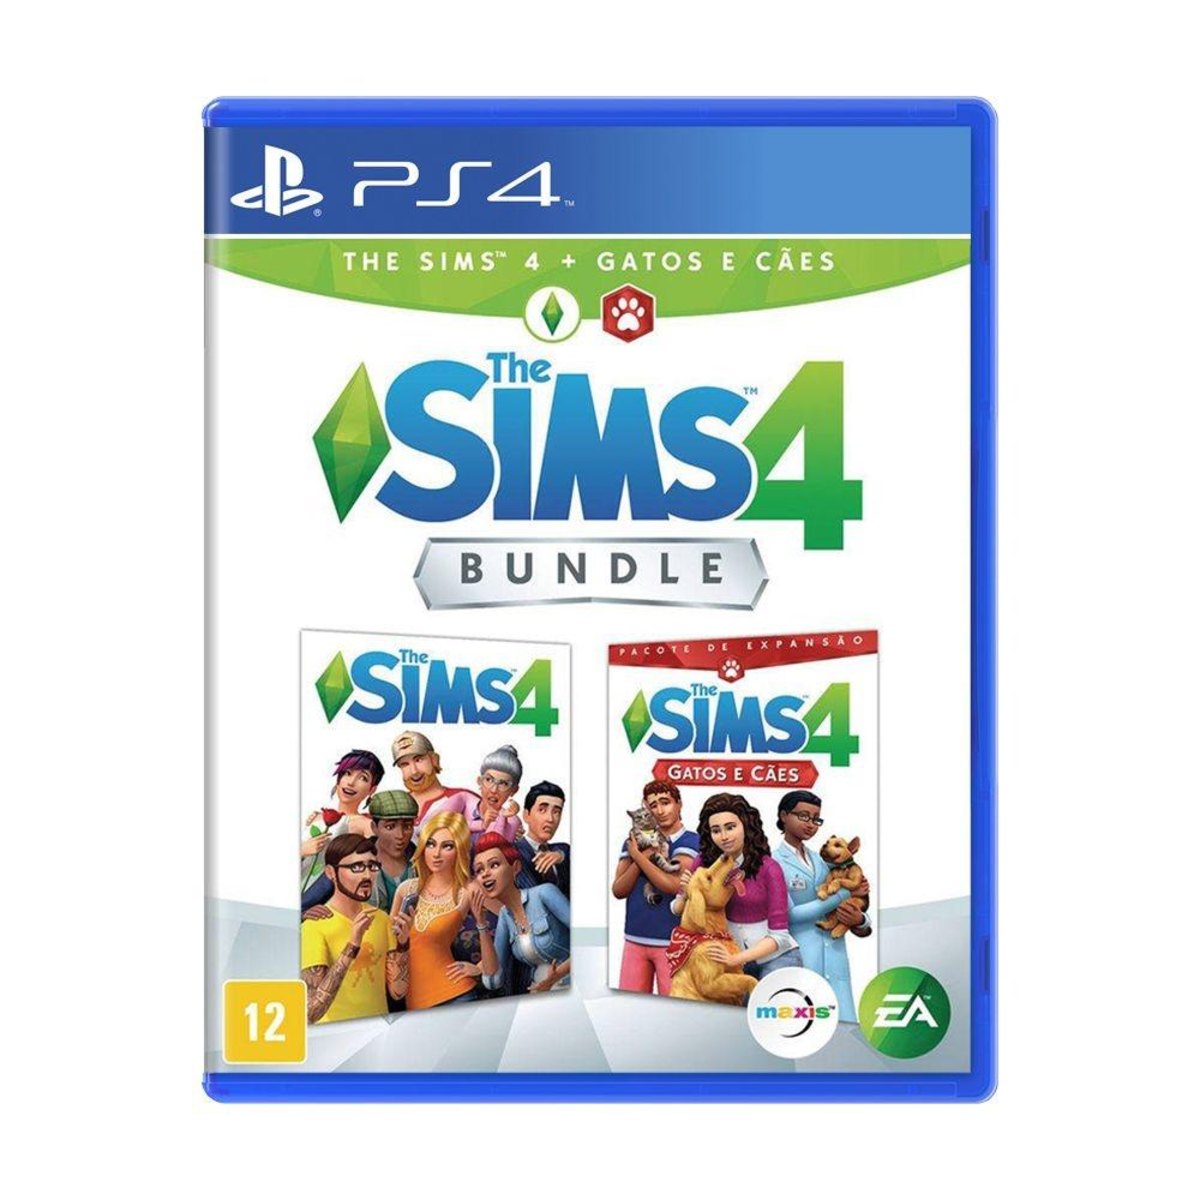 THE SIMS 4 PS4, PS4 Jogos